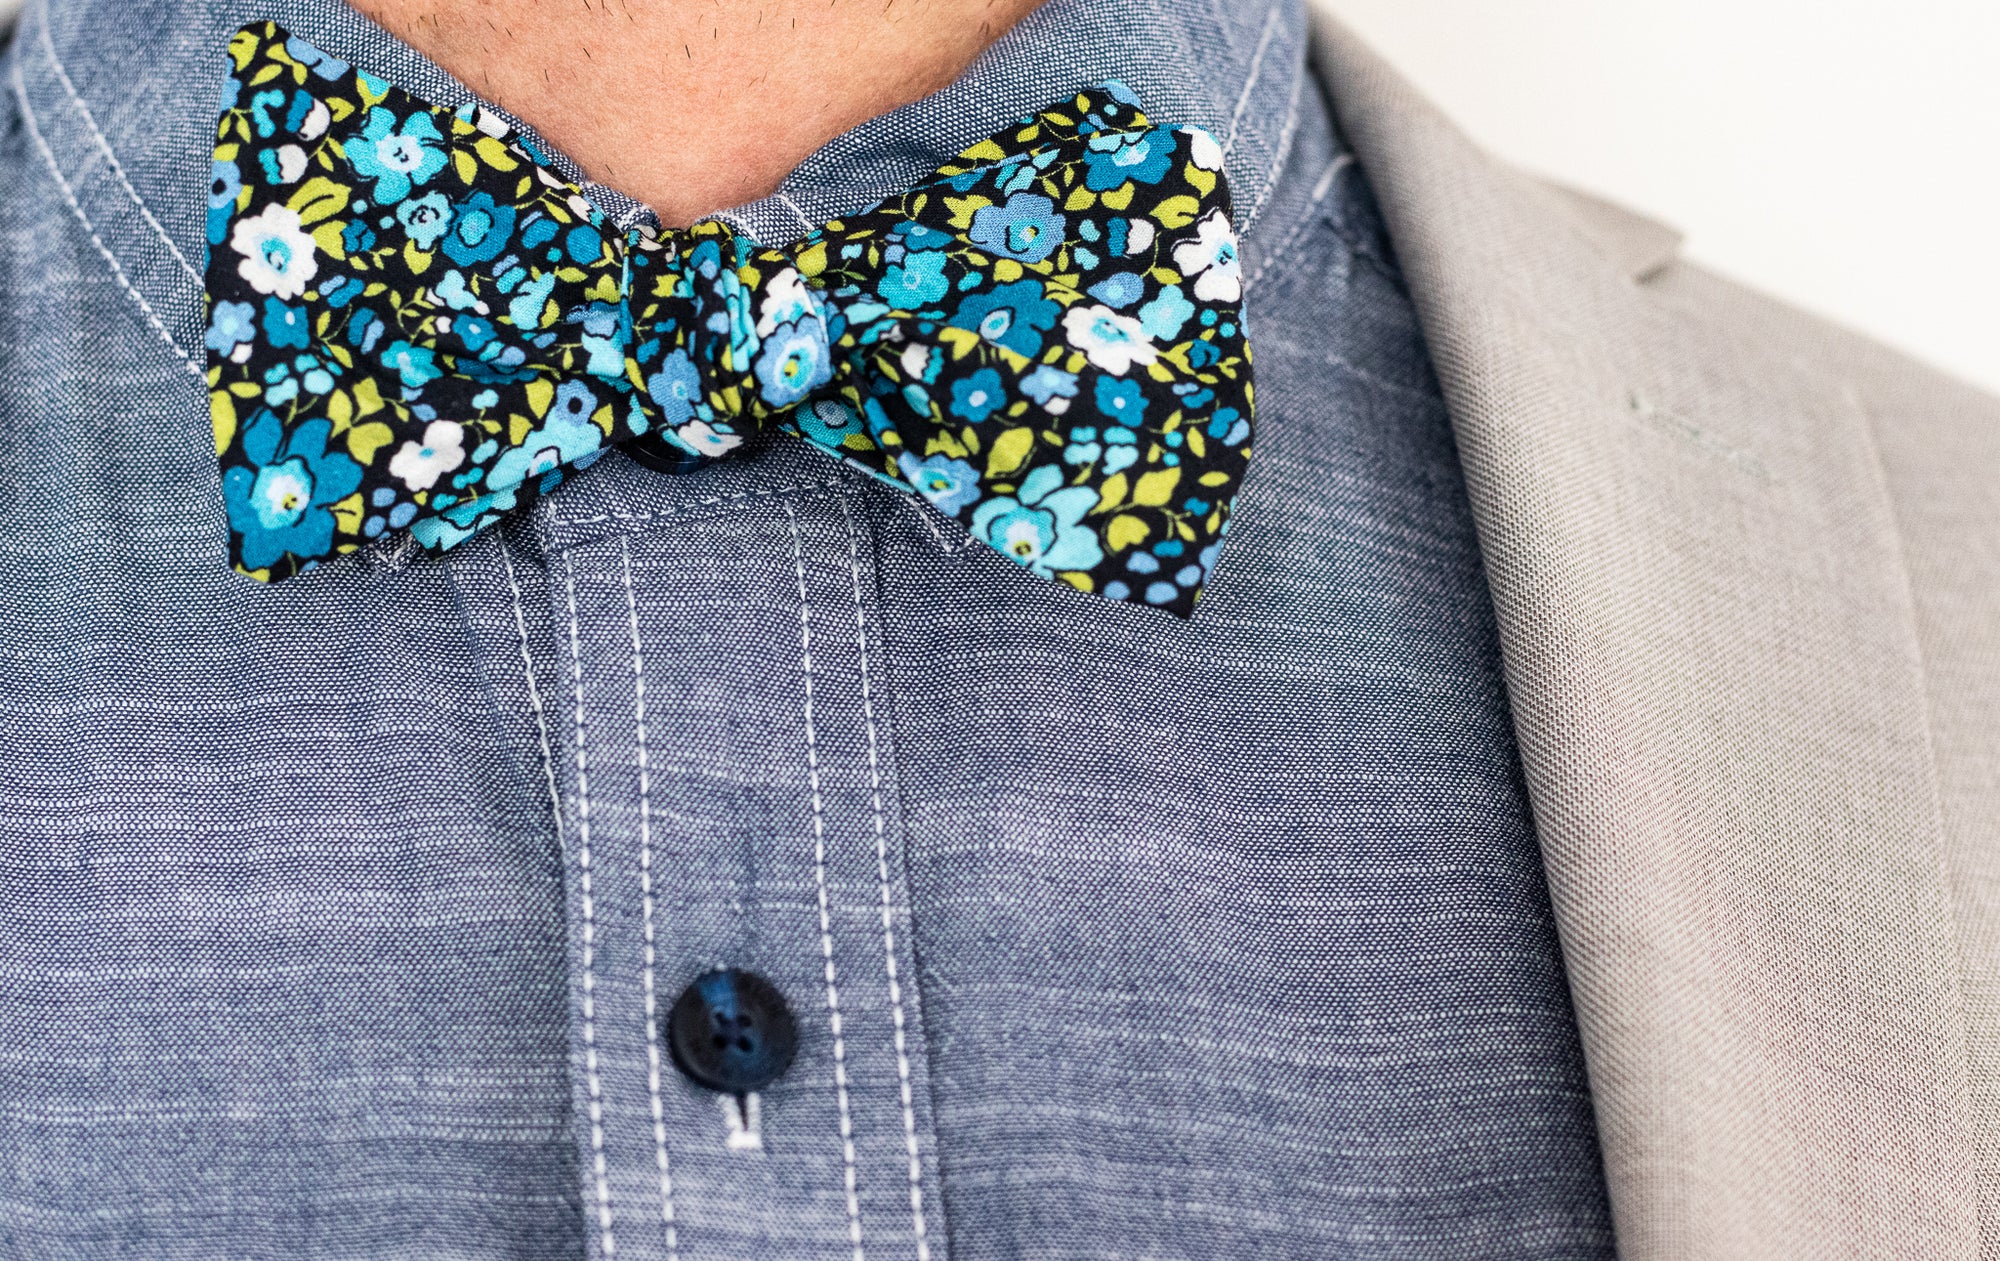 cotton mens bow tie featuring a blue floral pattern.